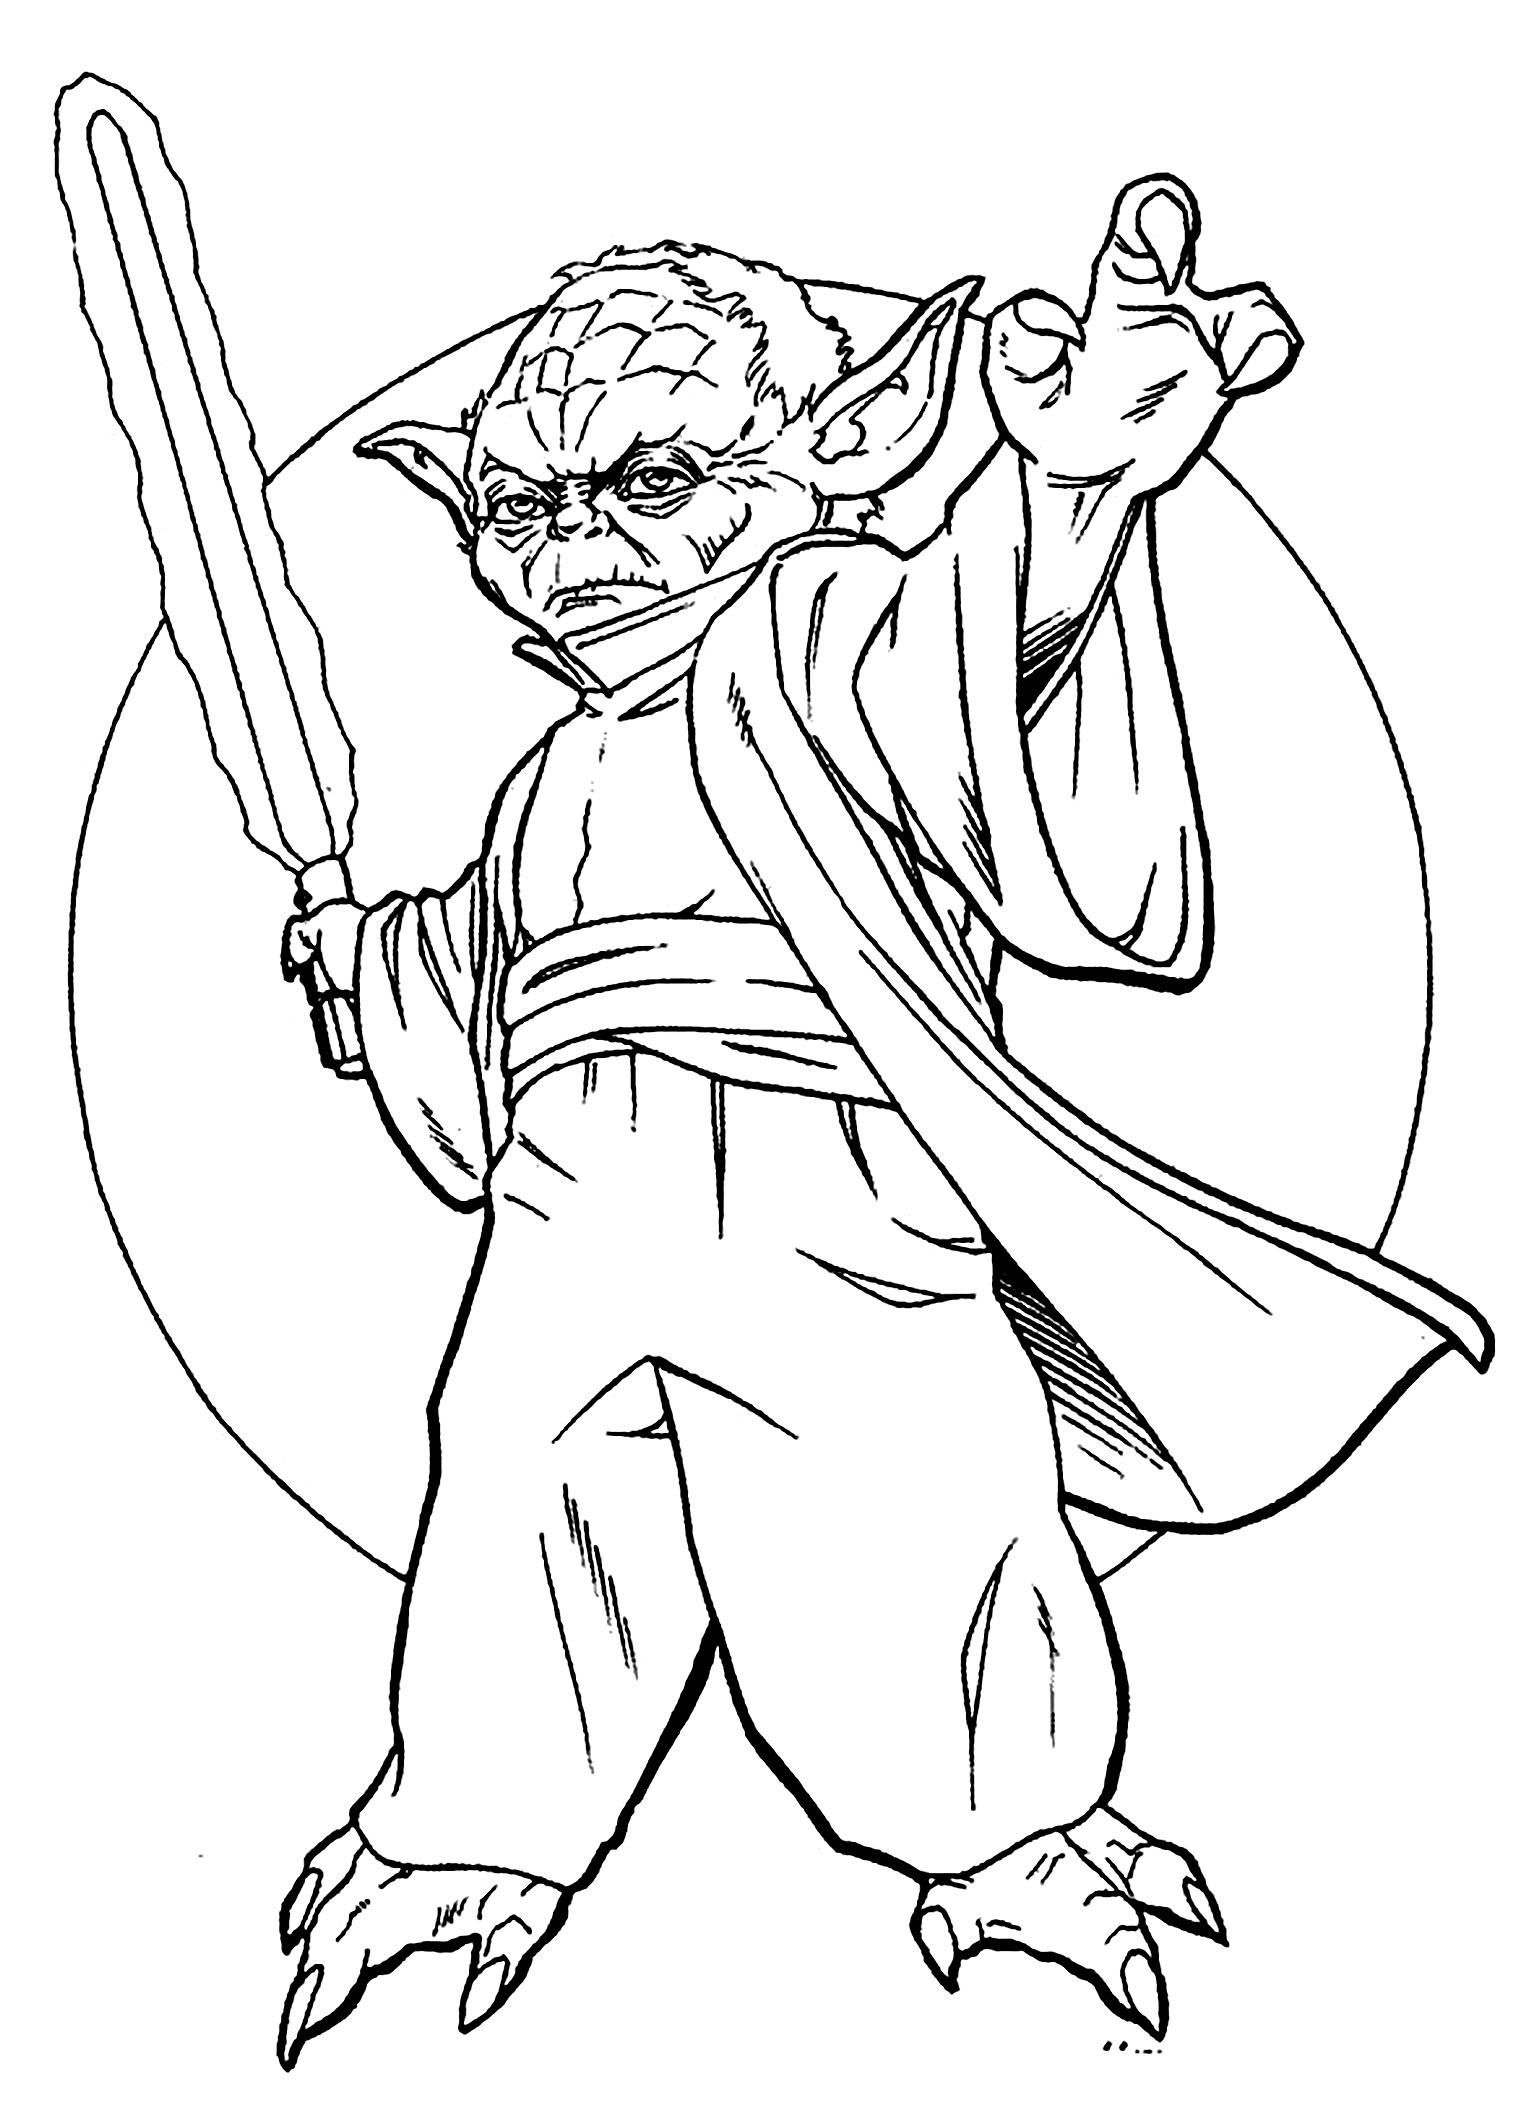 Star wars to color for children - Star Wars Kids Coloring Pages